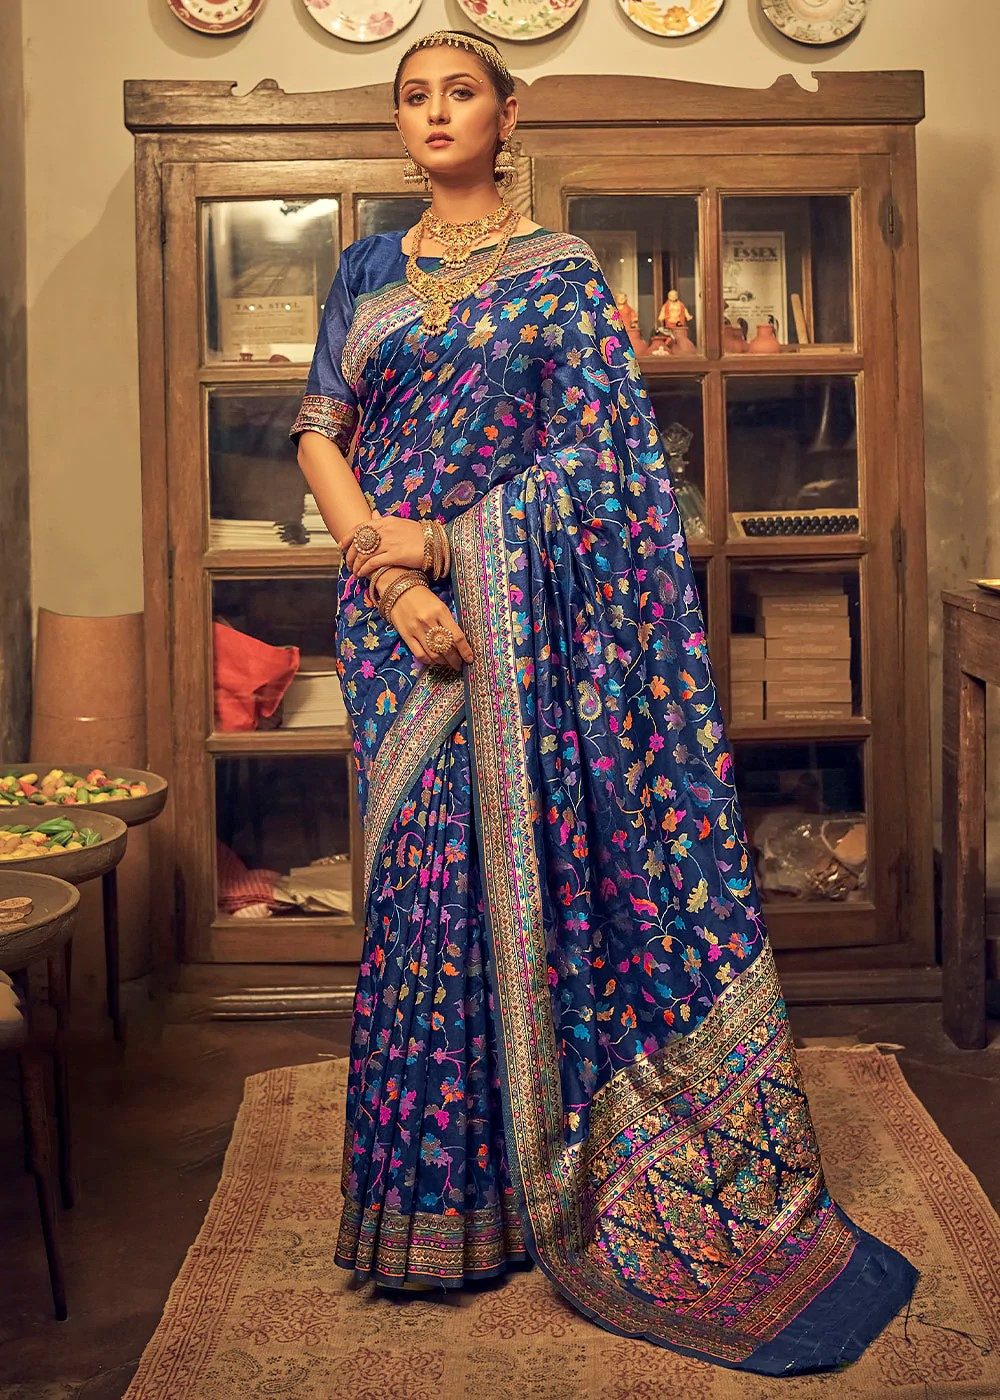 Women's Woven silk Saree With Free Size Blouse, Blue